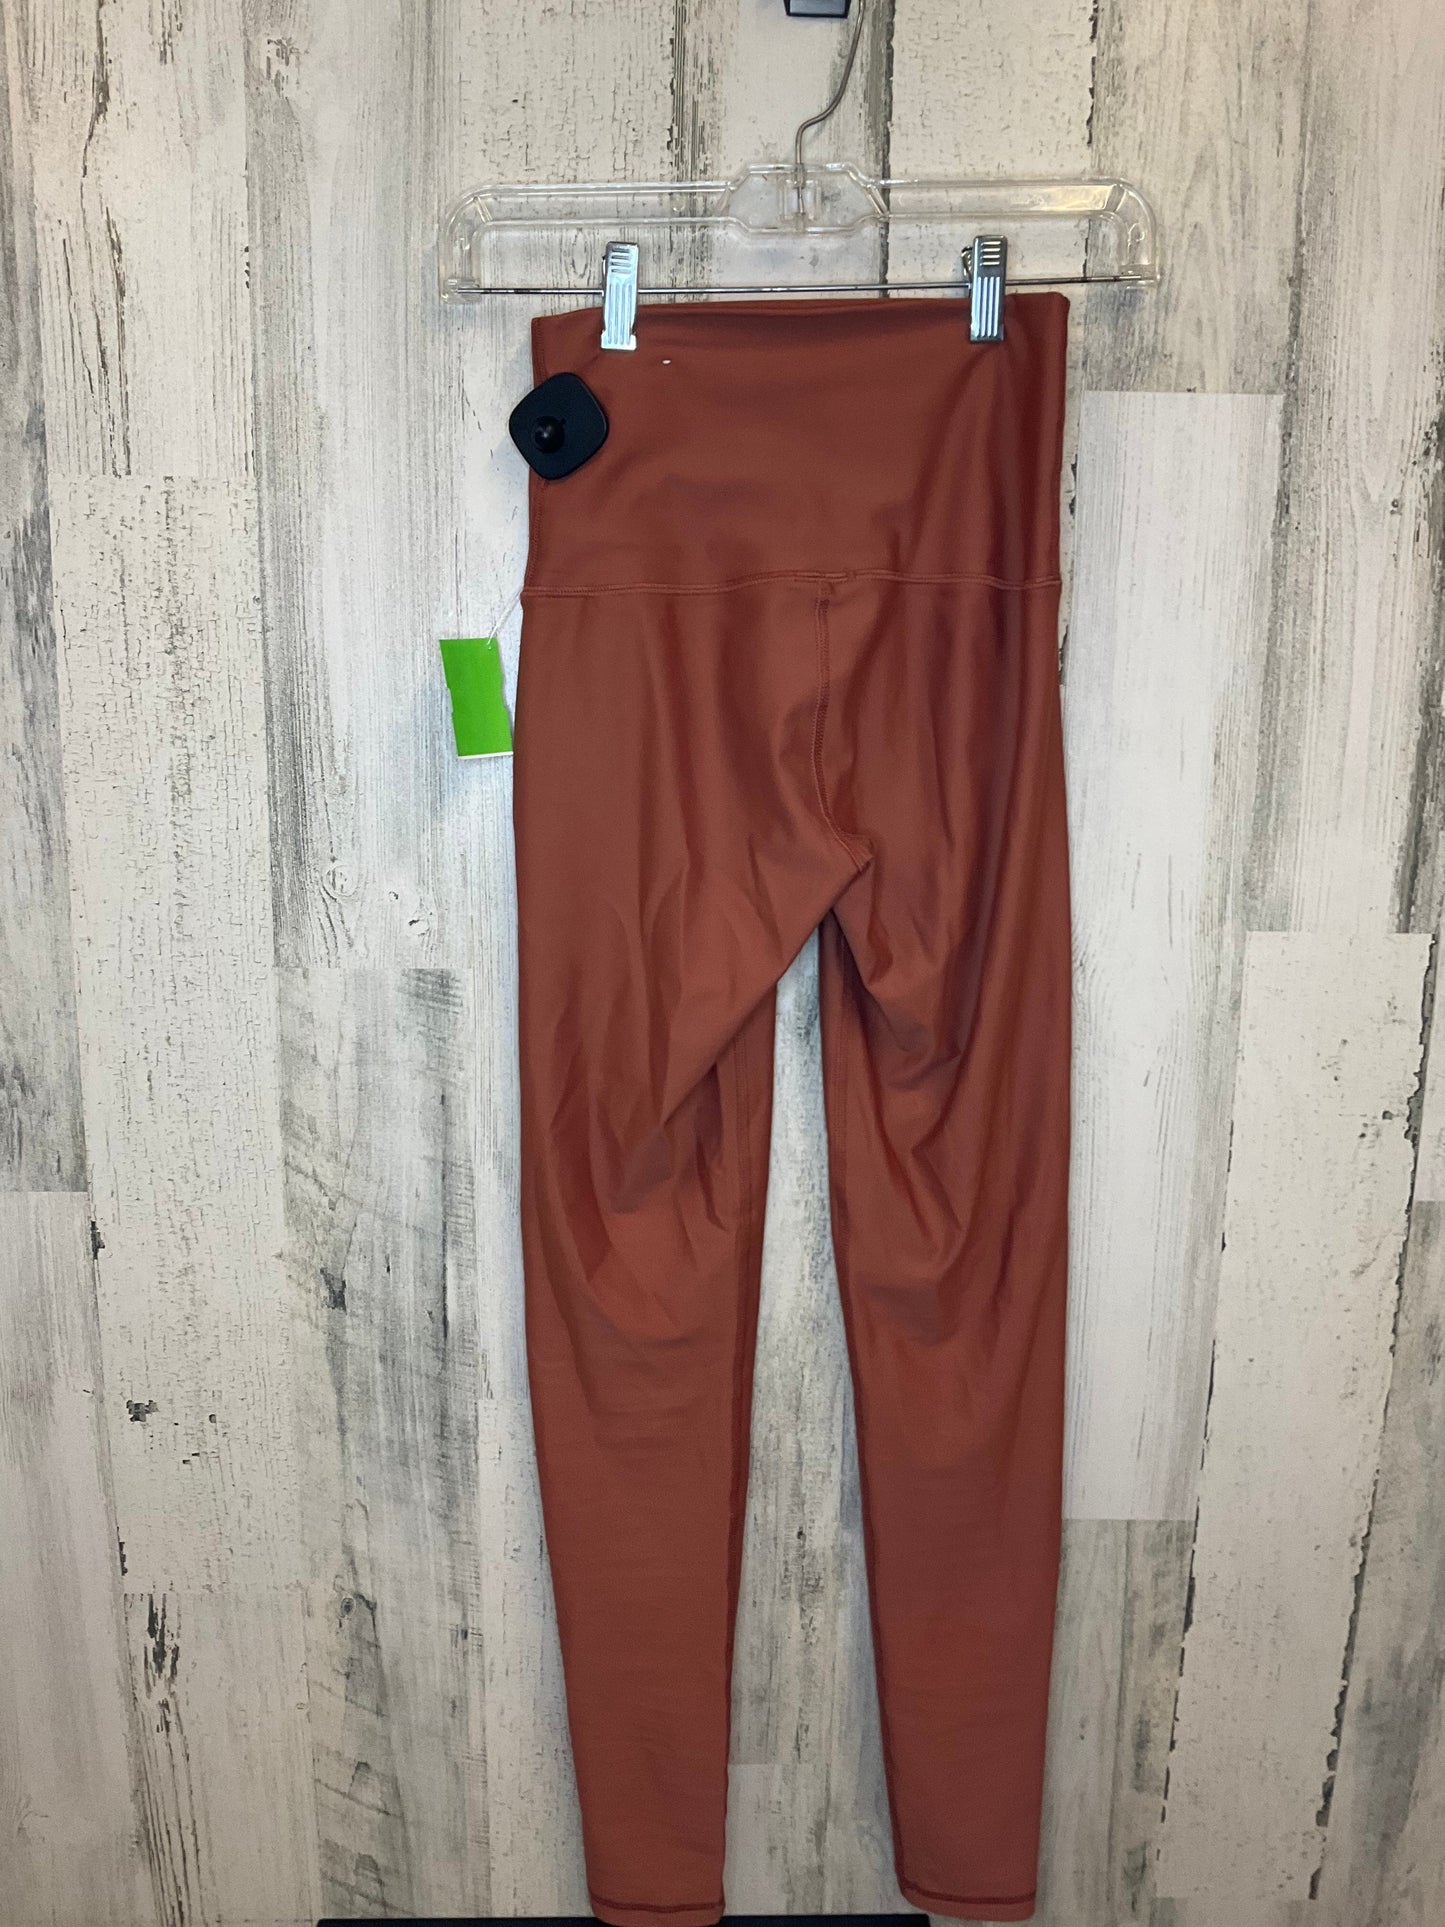 Leggings By Aerie  Size: S